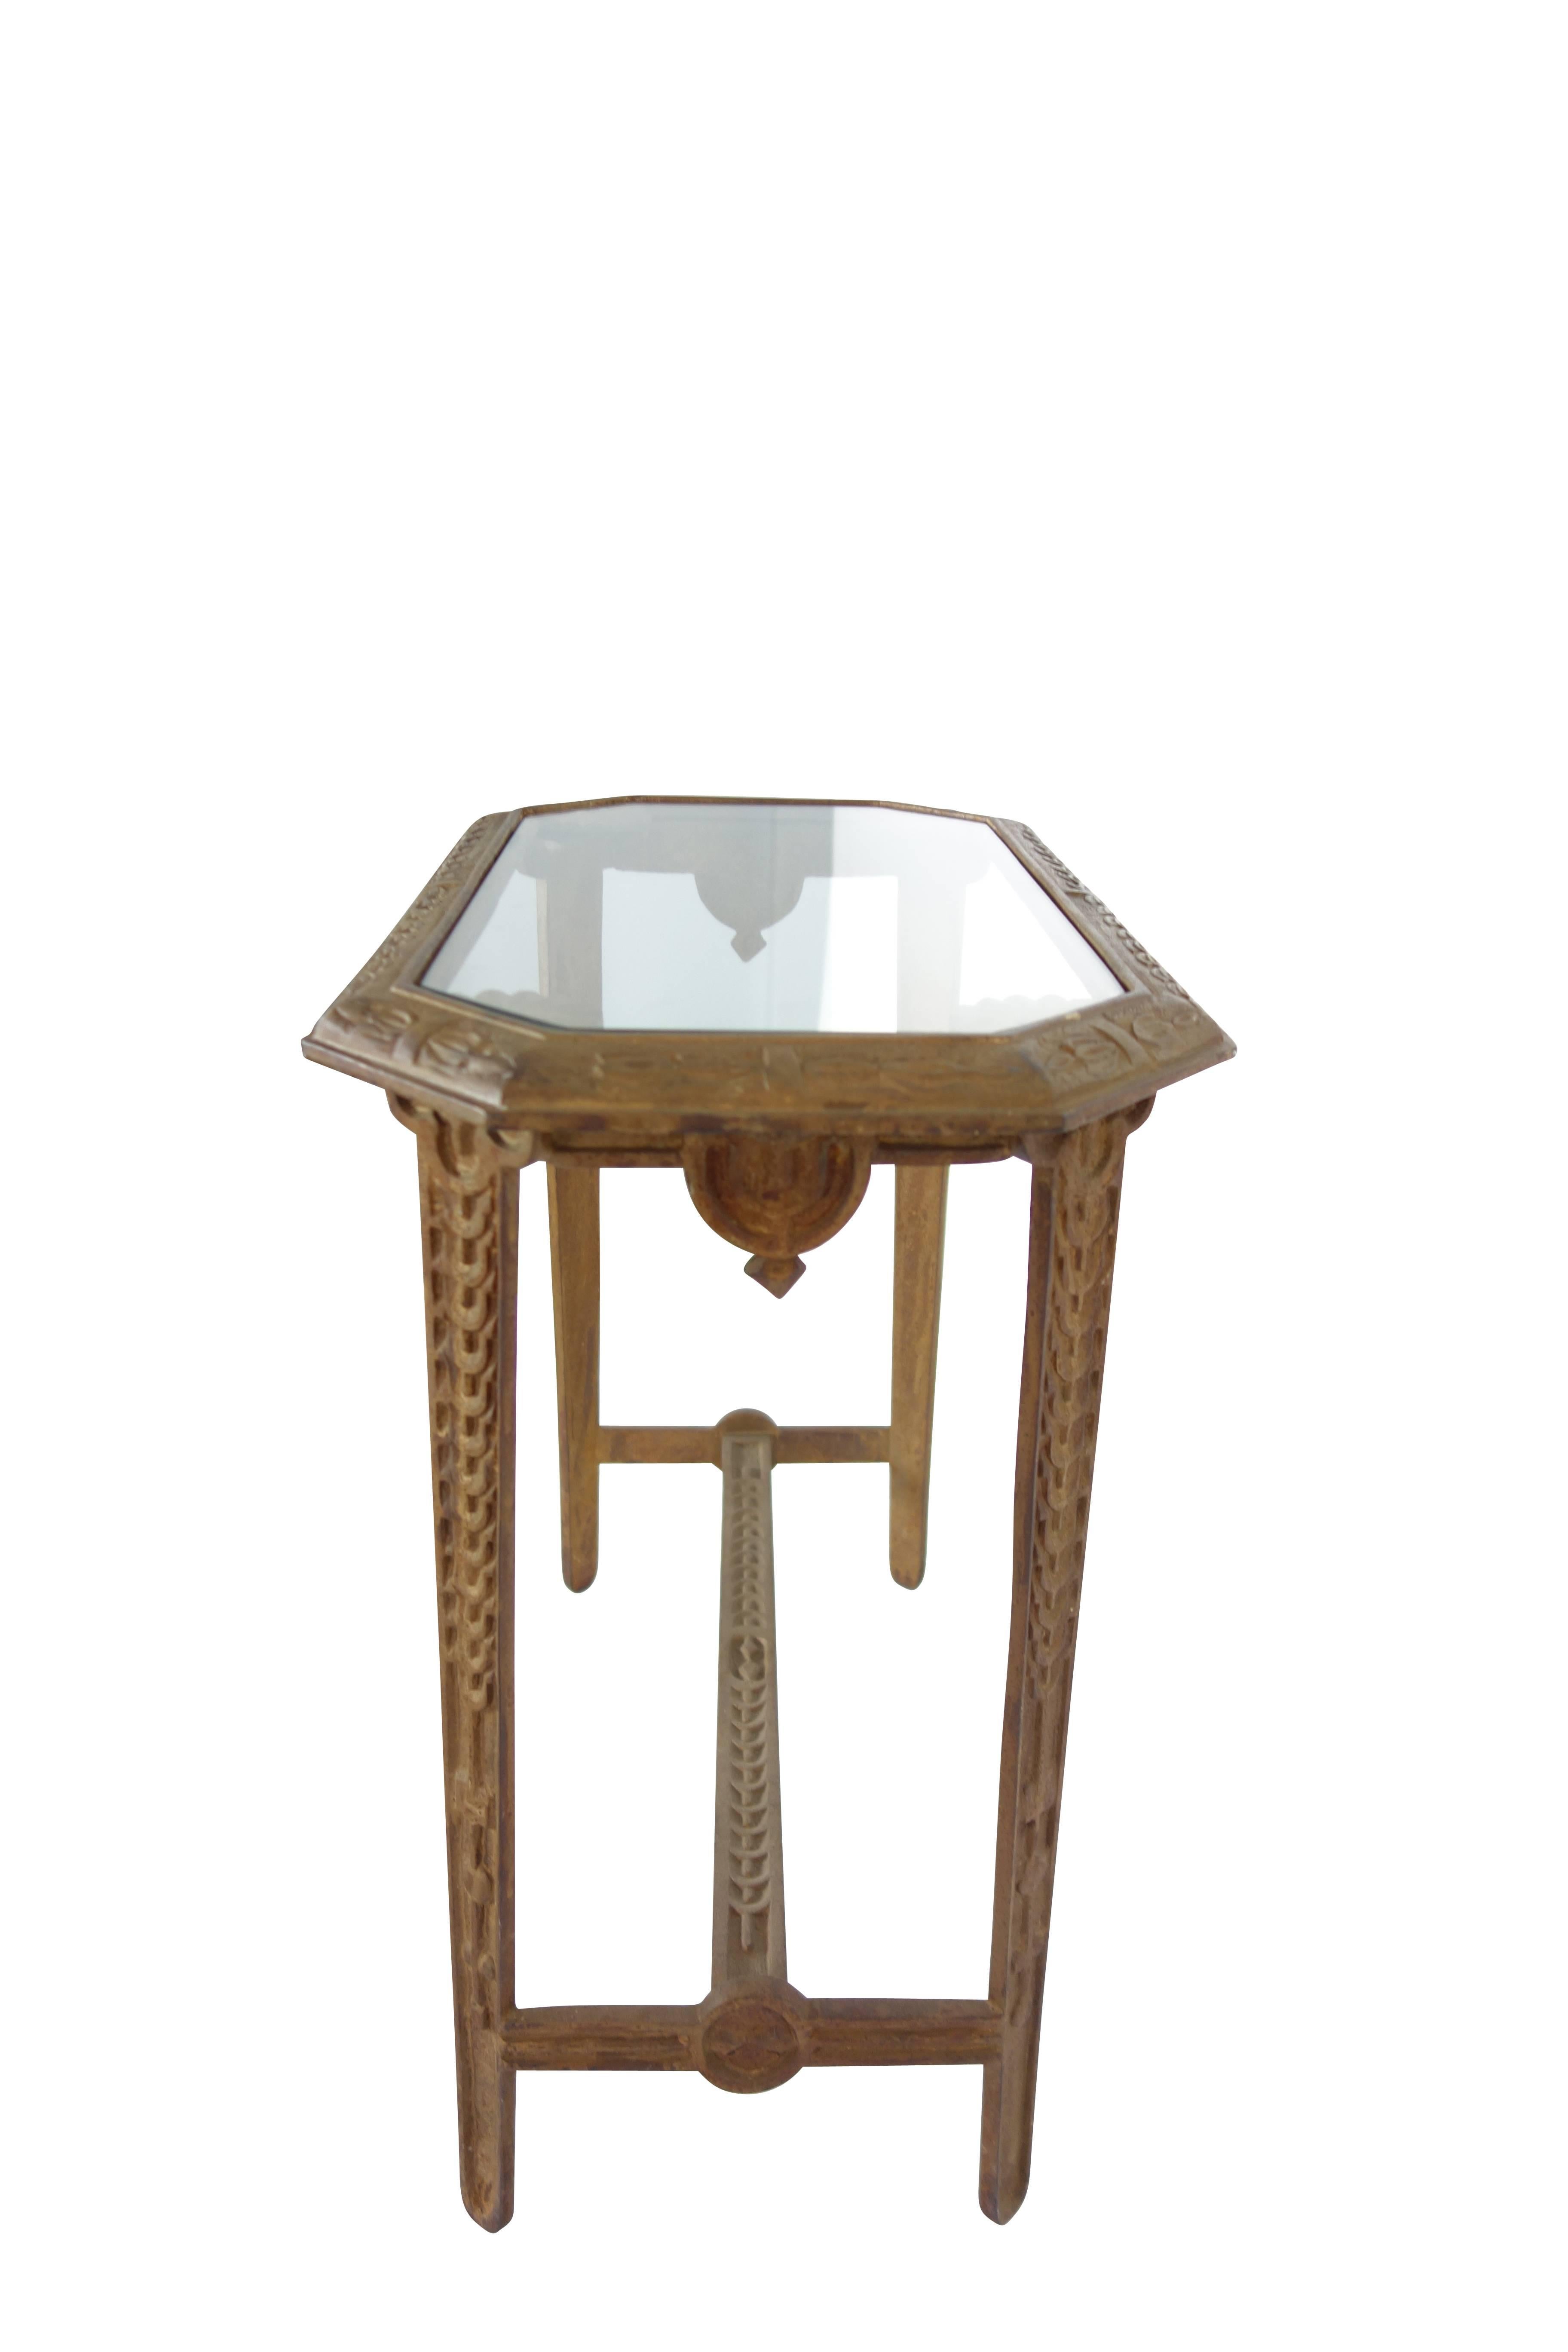 Mid-20th Century Art Deco Cast Iron and Glass Side Table